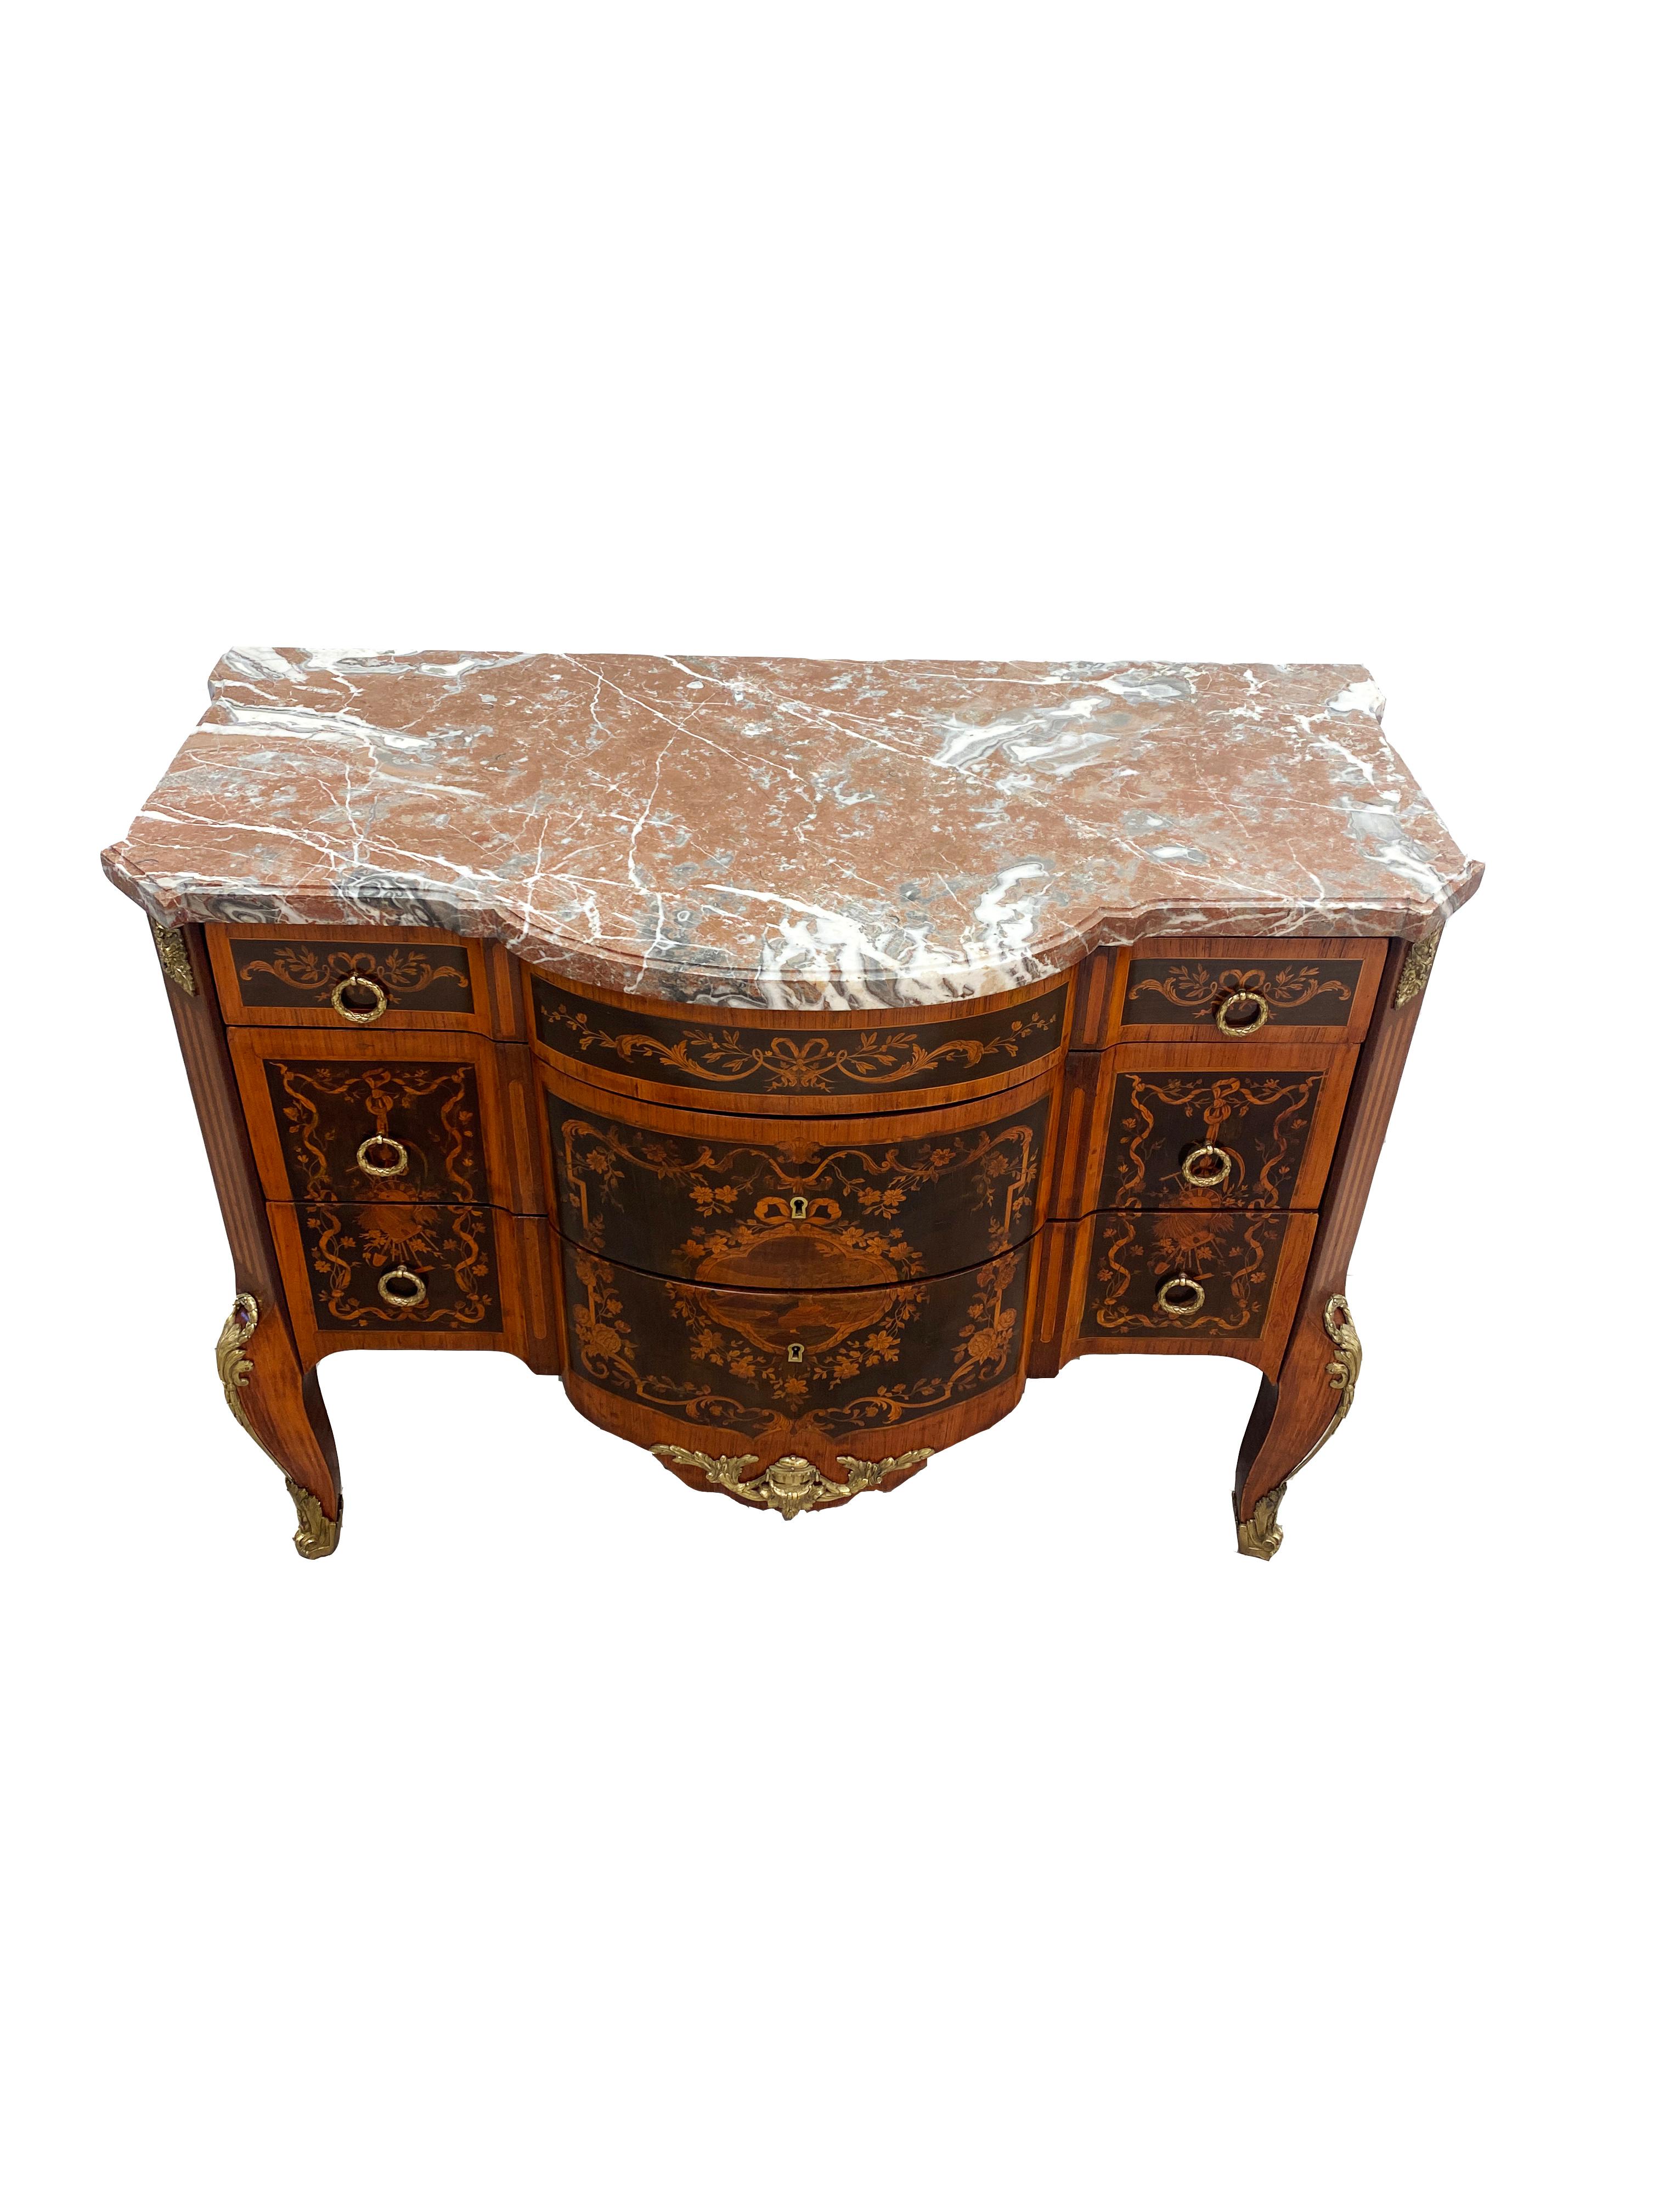 A handsome period Louis XVI commode from the later half of the 18th century. Heavy use of marquetry and parquetry inlays using tulipwood, kingwood and rosewood throughout the sides and drawer fronts the case was constructed with oak. The legs